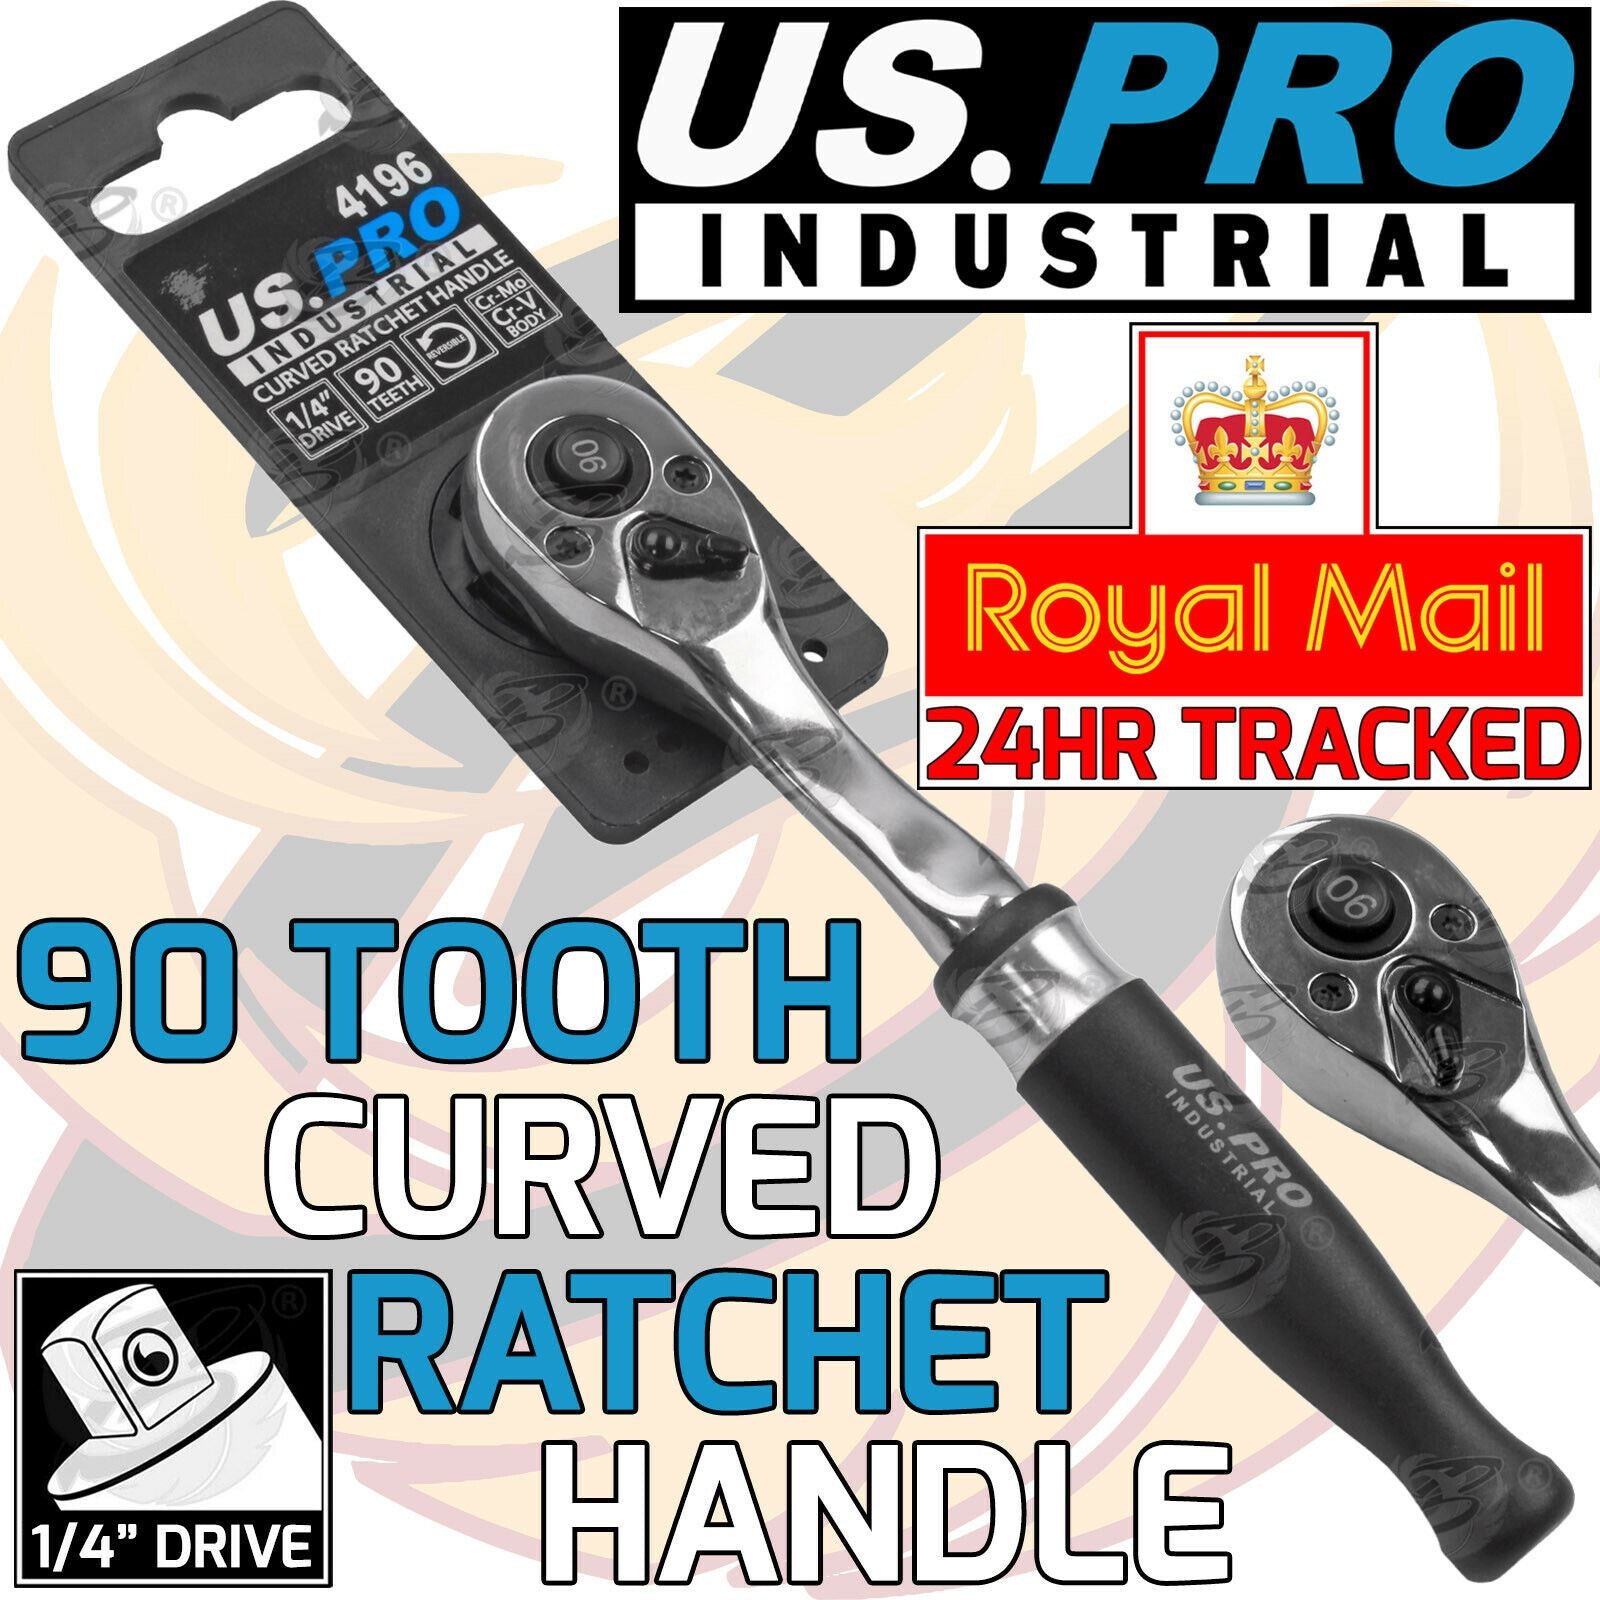 US PRO INDUSTRIAL 1/4" DRIVE 90 TOOTH CURVED RATCHET HANDLE